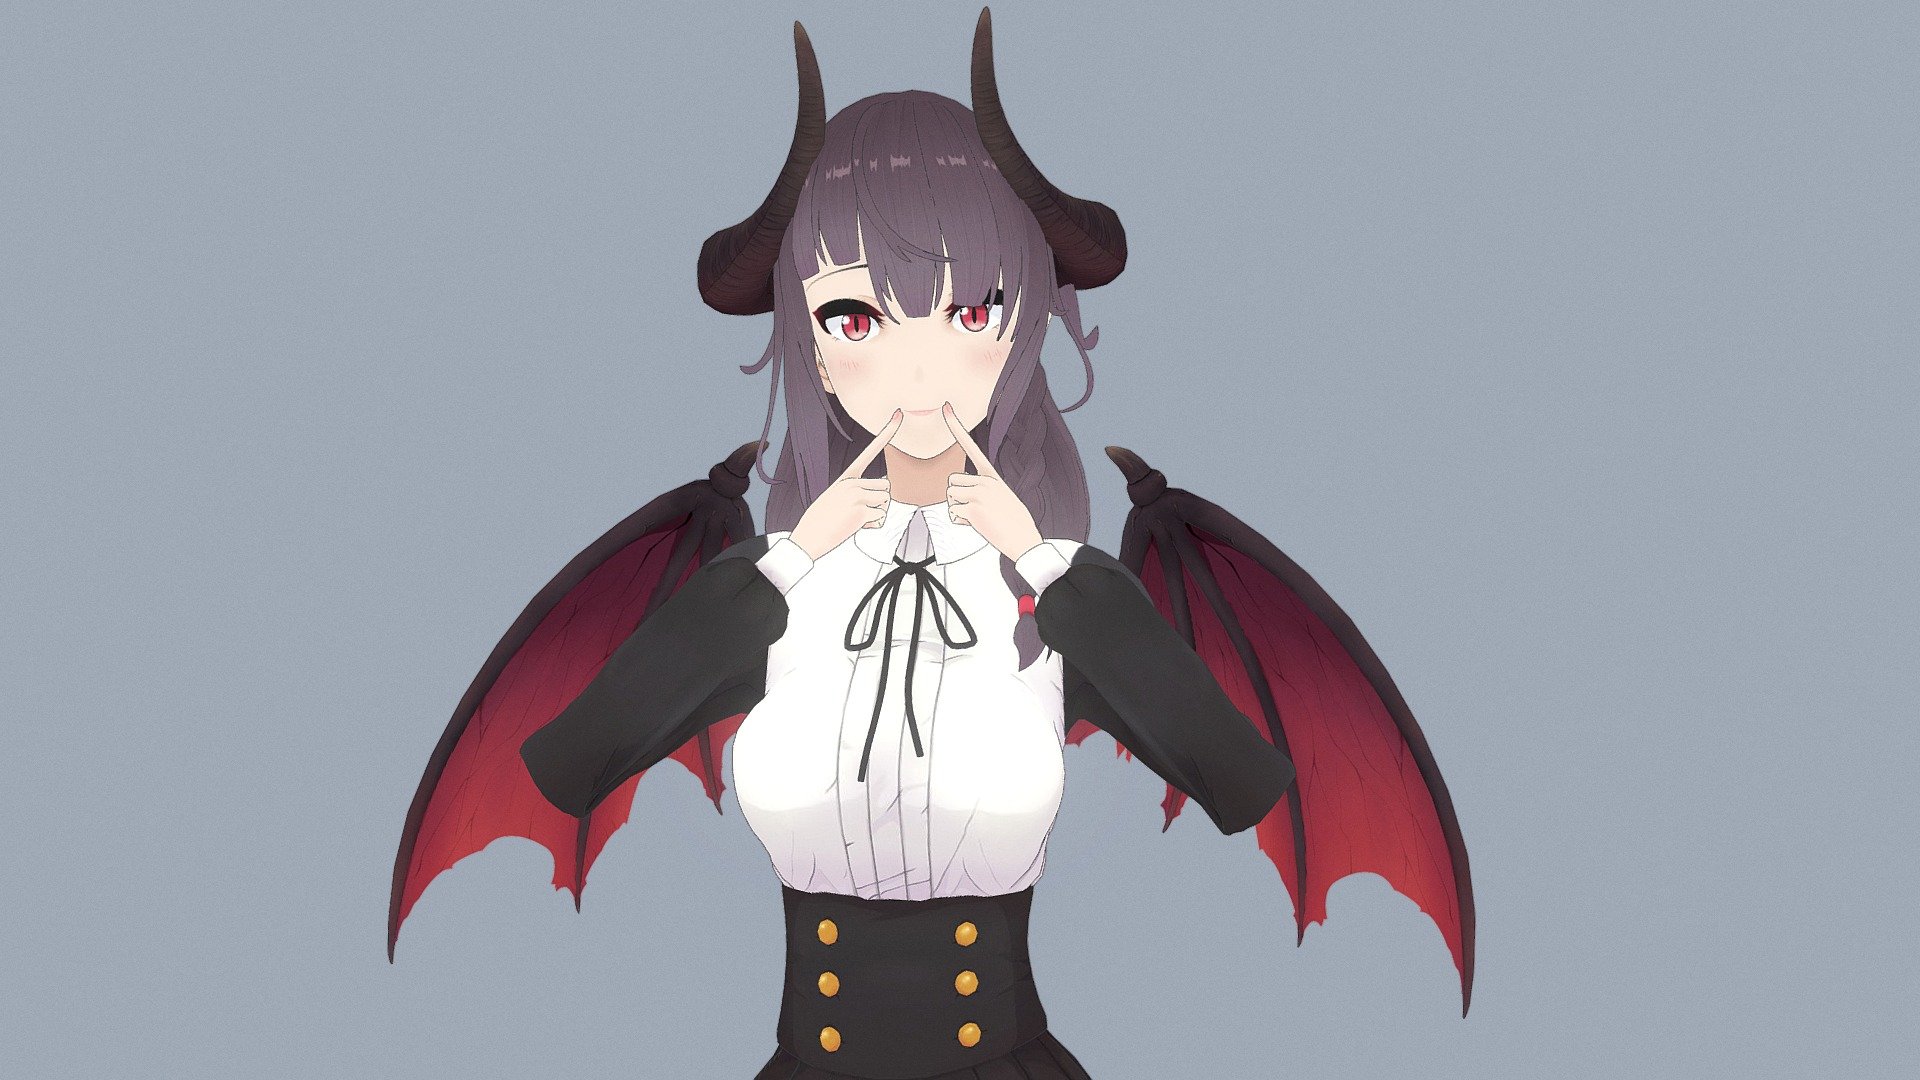 A fully rigged monster girl dragonewt character for Blender

Rig Demo: https://youtu.be/RFDWpR5avS8

Features:


Fully rigged with IK FK switch
Simple facial expression &amp; face rig
4K cel-shading &amp; handpainted art style texture
Full body with clothes, full nude texture
Subdivision ready

Lowpoly count:


Dragonewt Body - Tris: 24,224, Faces: 12,240, Verts: 12,530
Hair - Tris: 18,124, Faces: 9,226, Verts: 9,696
Cloth - Tris: 12,843, Faces: 6,599, Verts: 6,535
Shoe - Tris: 2,012, Faces: 1,028, Verts: 1,010

Note: no animation include inside this character

Create your own character: Customize Female Base Mesh-Anime Style - Monster Girl Dragonewt - Buy Royalty Free 3D model by menglow 3d model